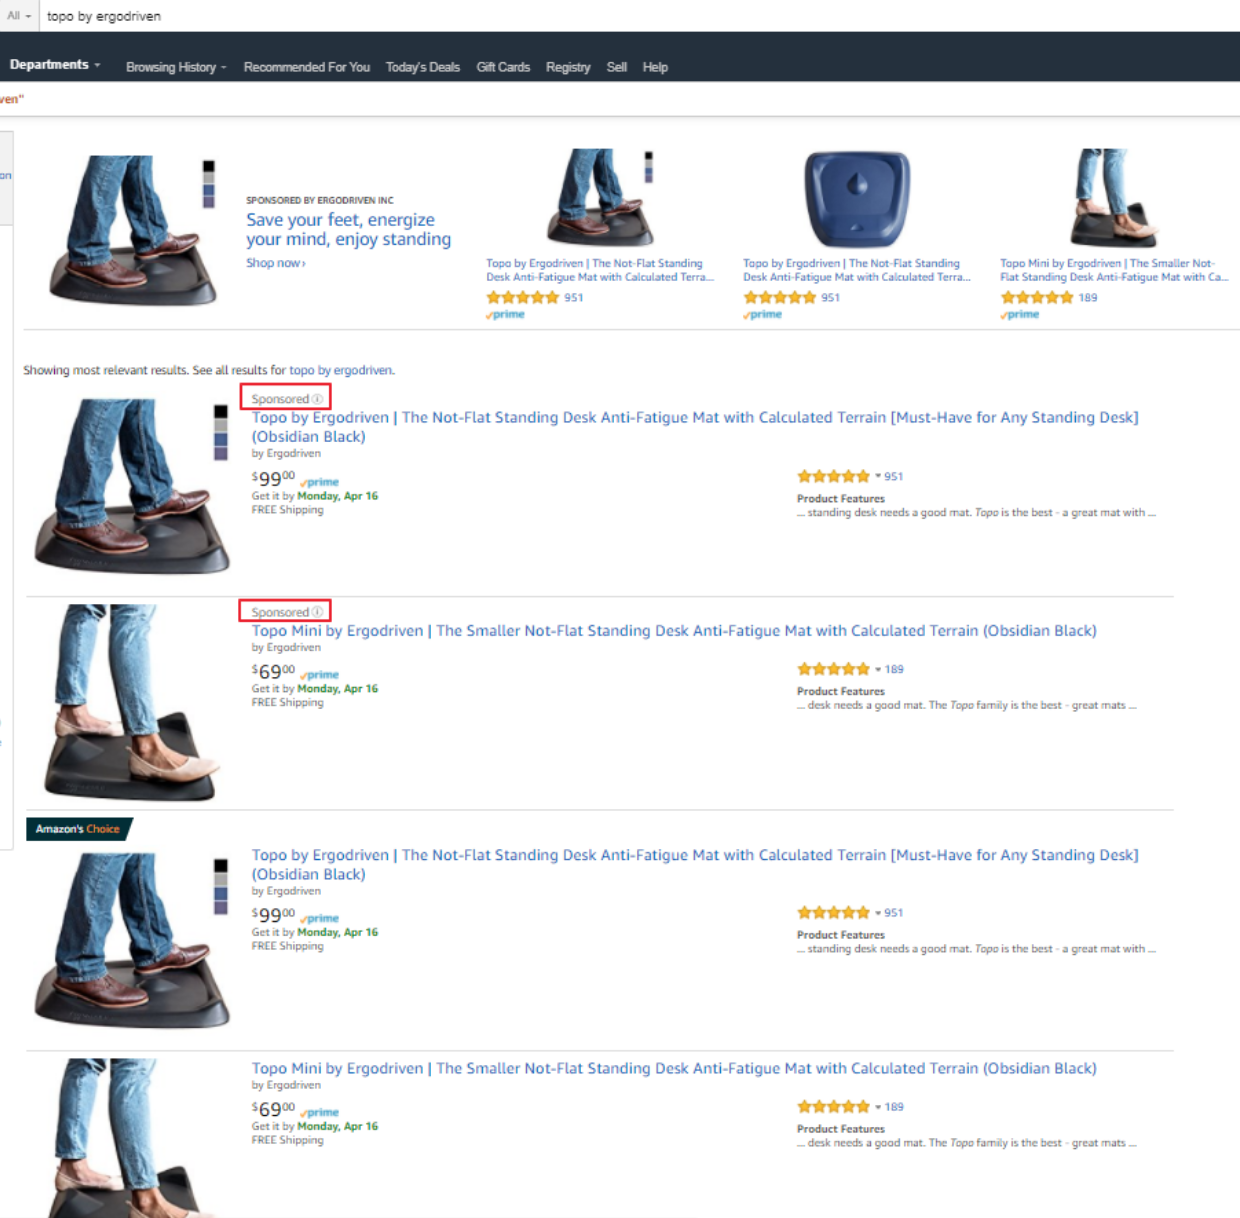 Screenshot showing search results on amazon